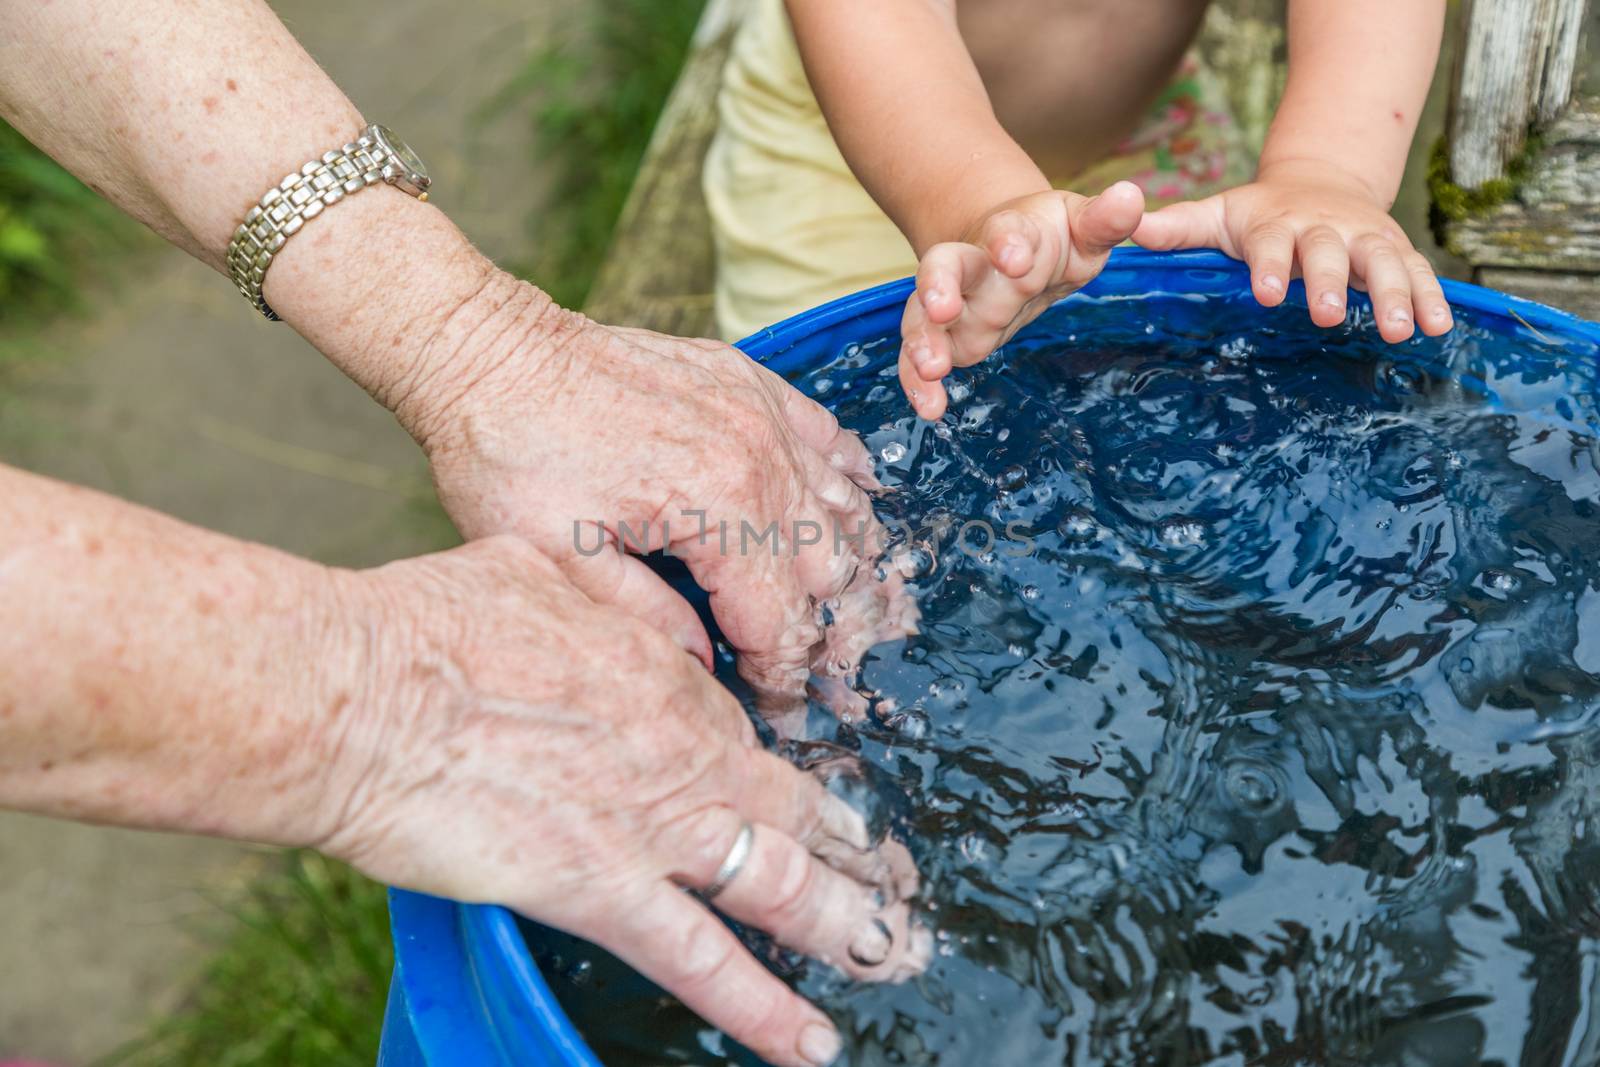 A boy and hos grandmother wash hands in the water barrel.